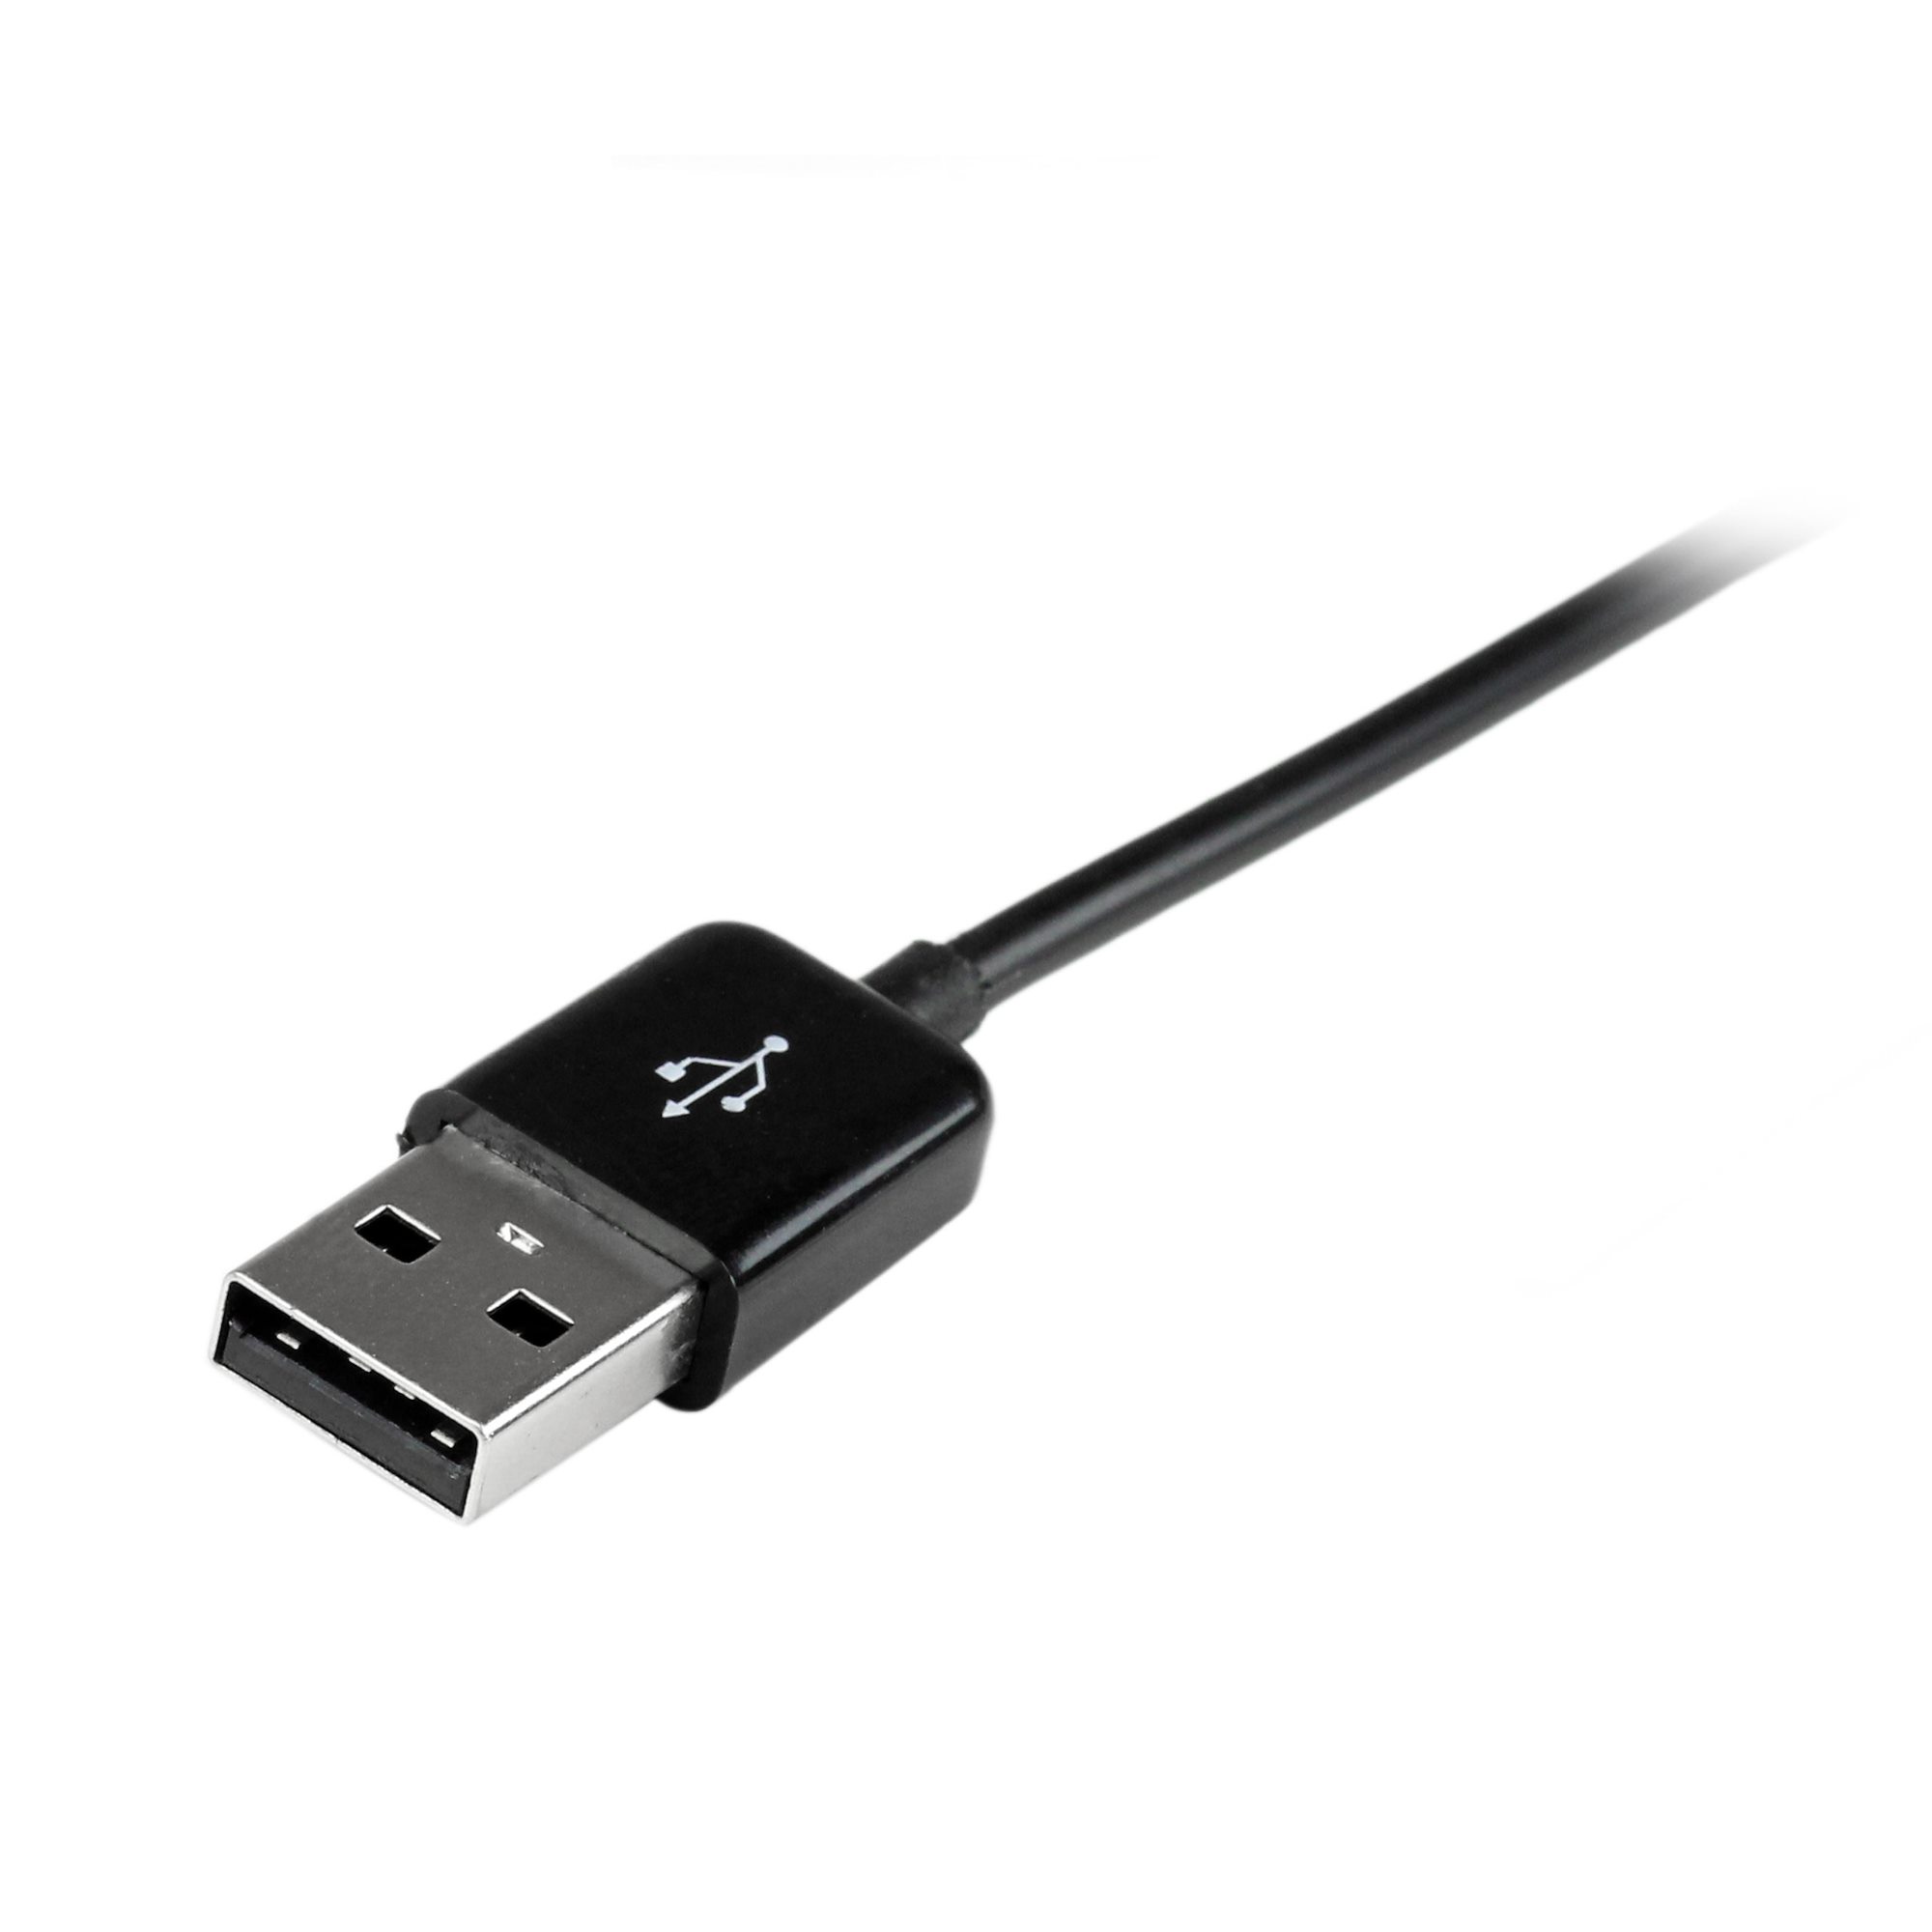 0.5m Dock to Cable for ASUS Transformer Pad and Eee Pad Transformer / Slider – BCI Imaging Supplies